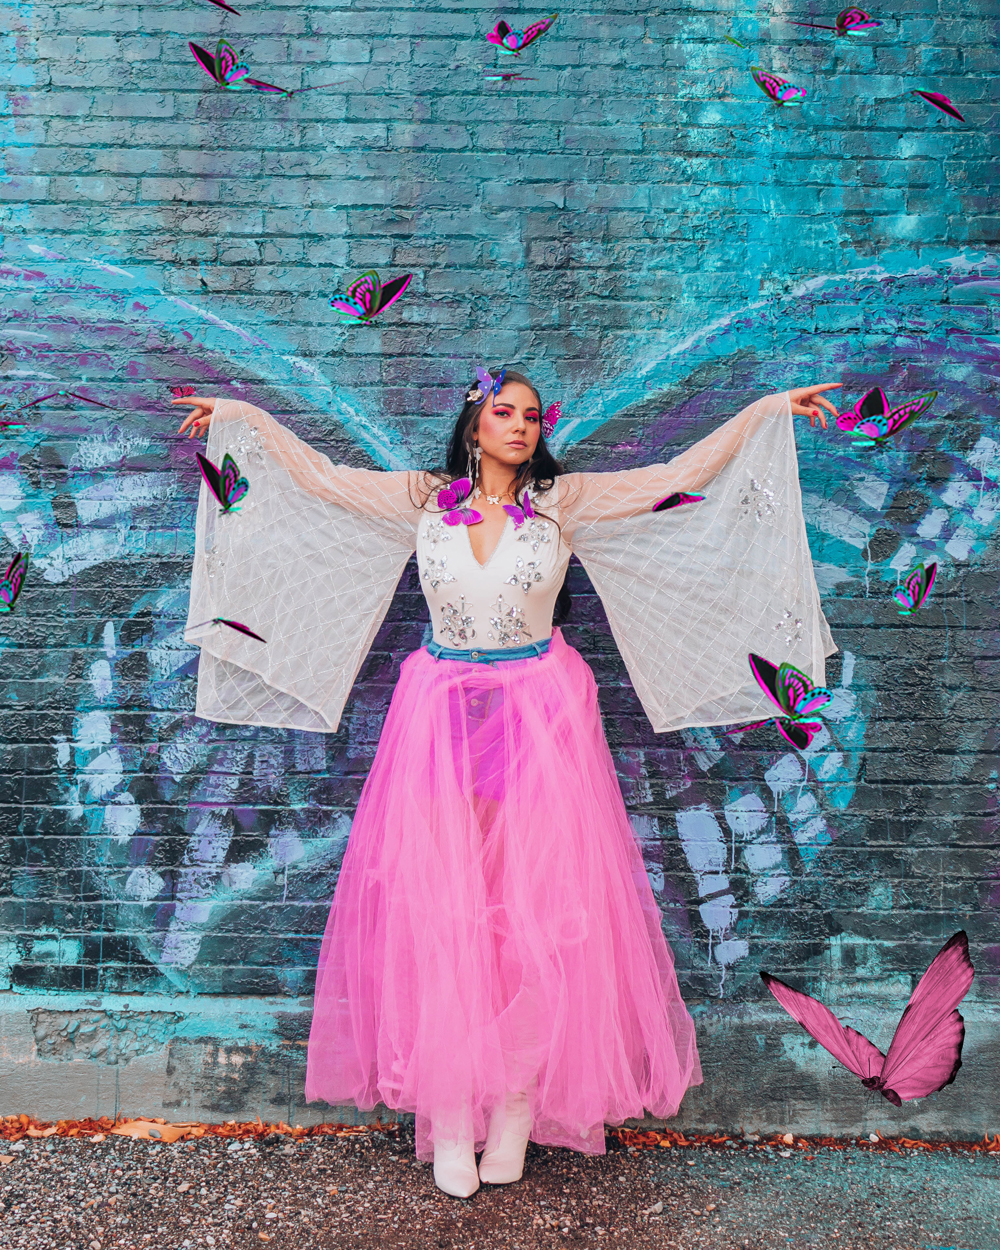 Lauryn hock became a beautiful pink and white butterfly for a DIY costume for Halloween